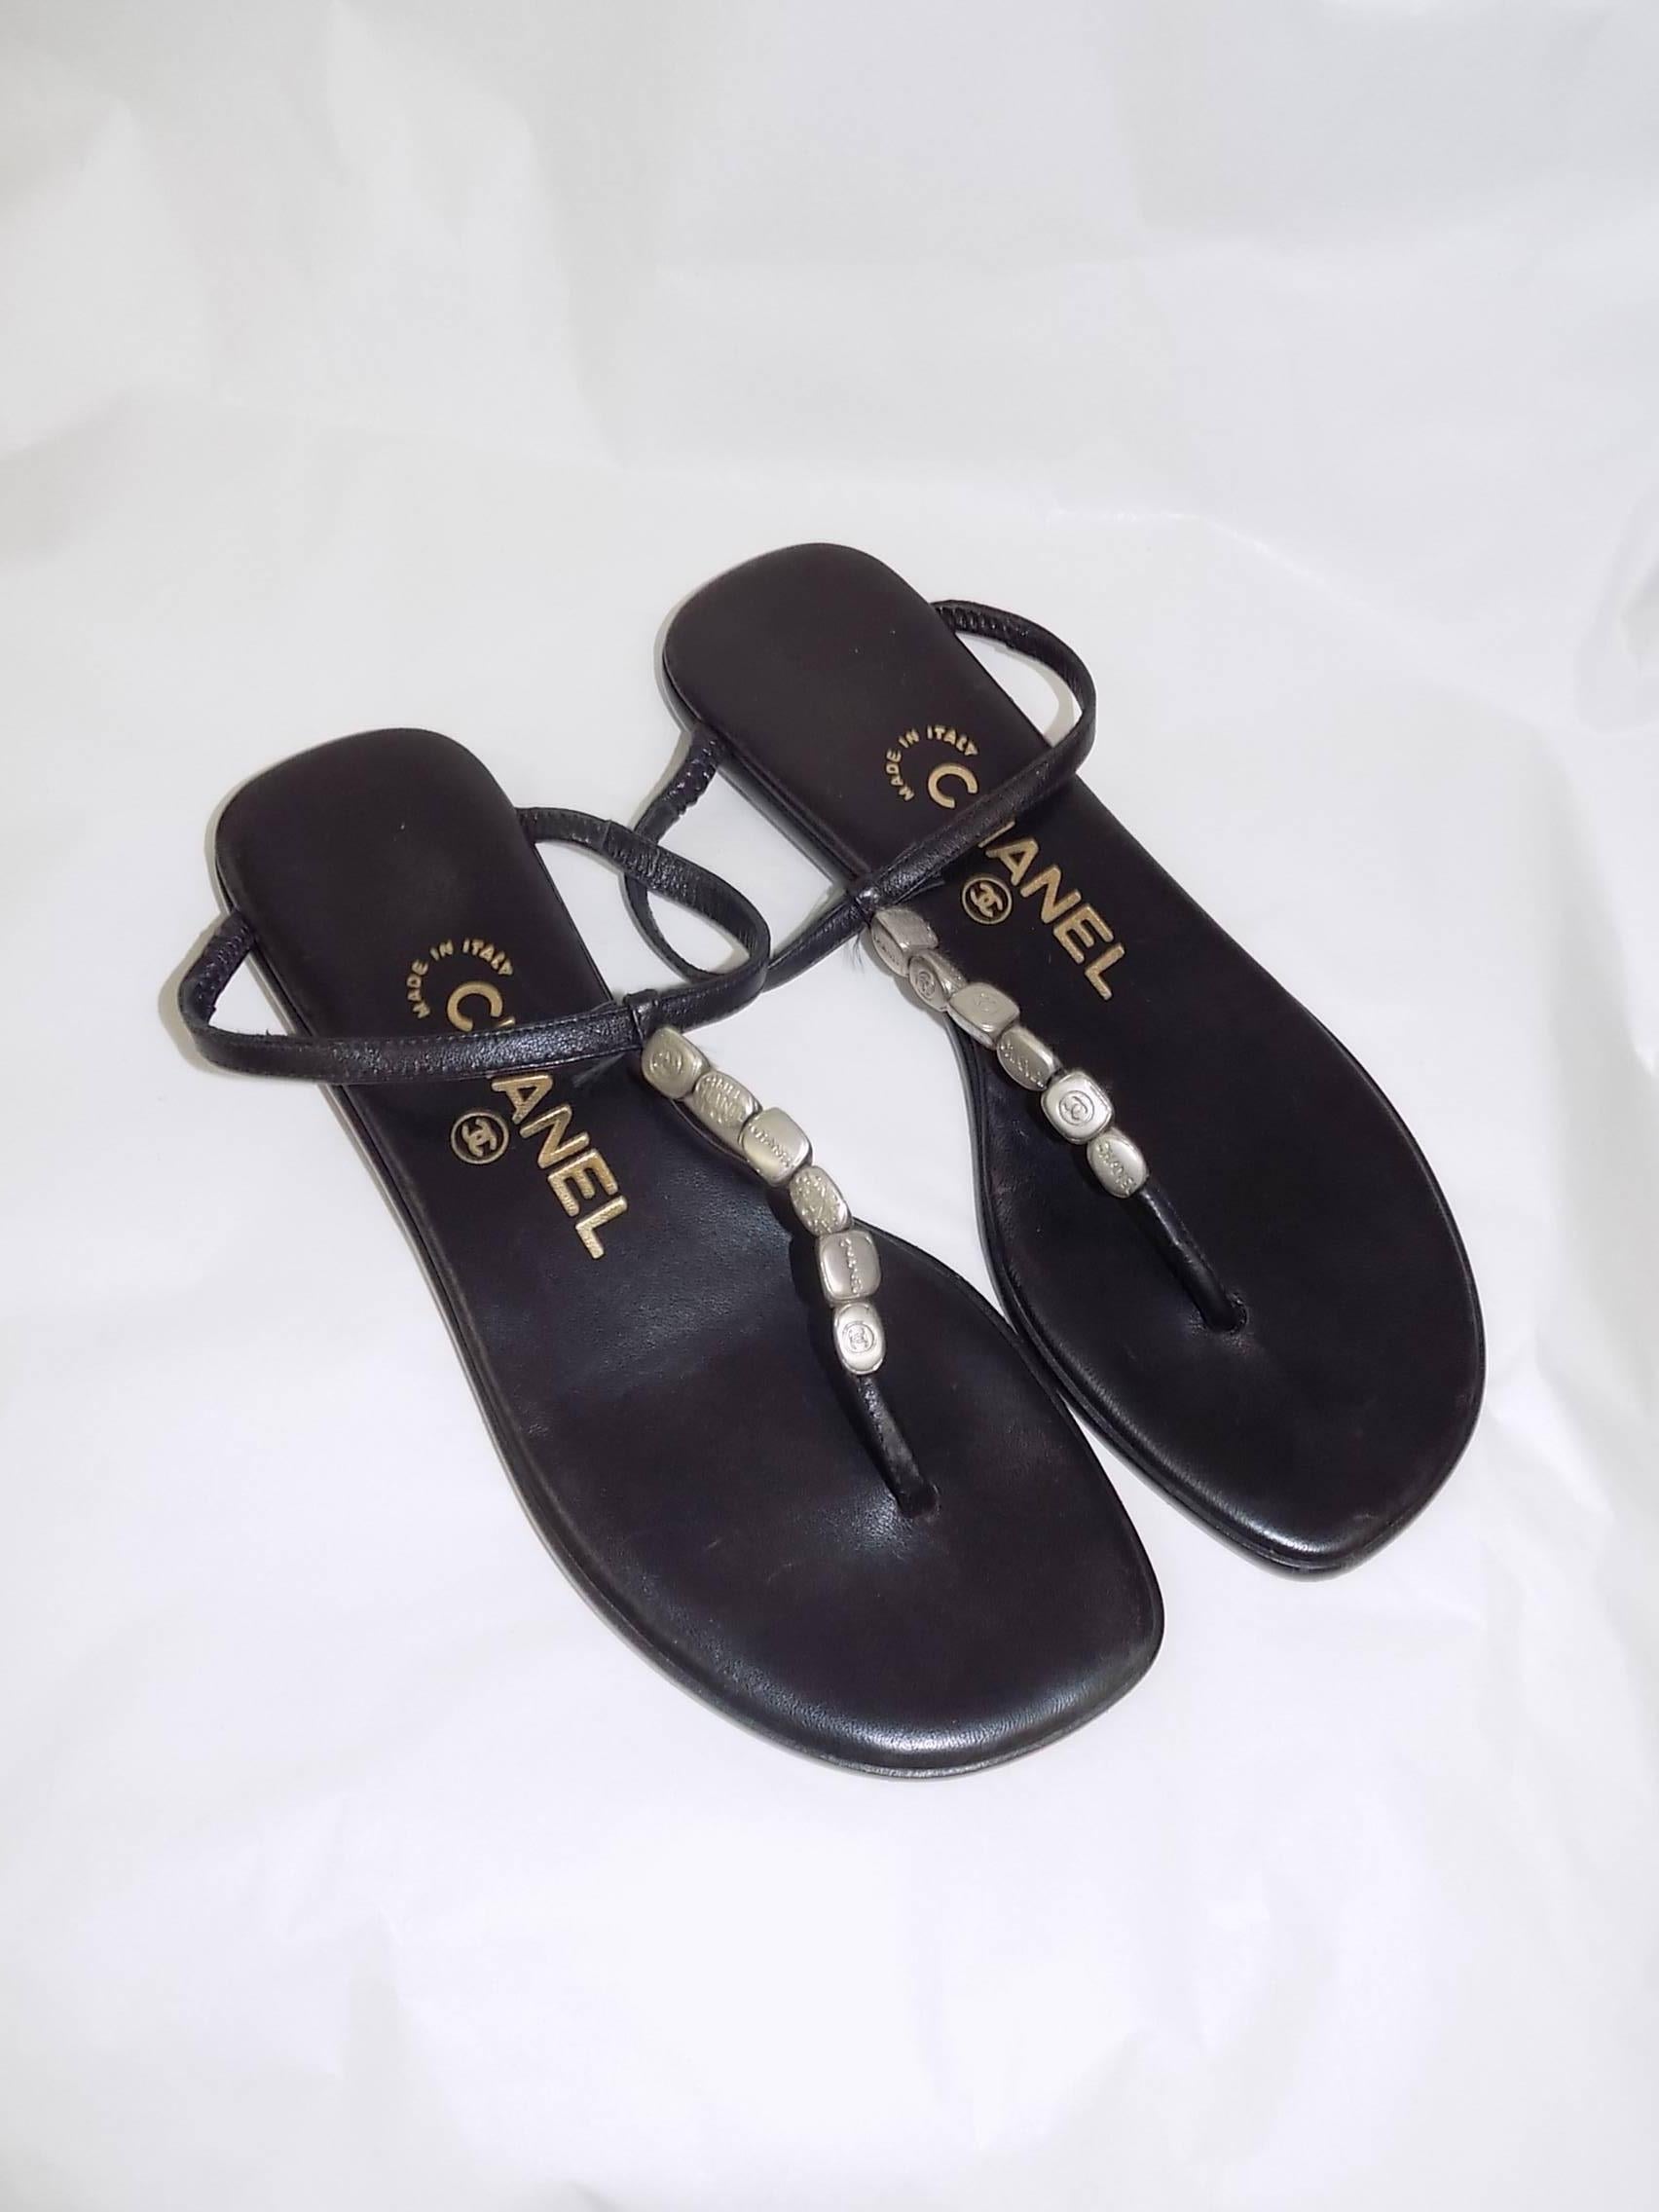 Black leather Chanel thong sandals with silver-tone logo bead embellishments, tonal stitching and stacked heels. Includes dust bag. Condition: Very Good. Faint wear at soles.Size 35